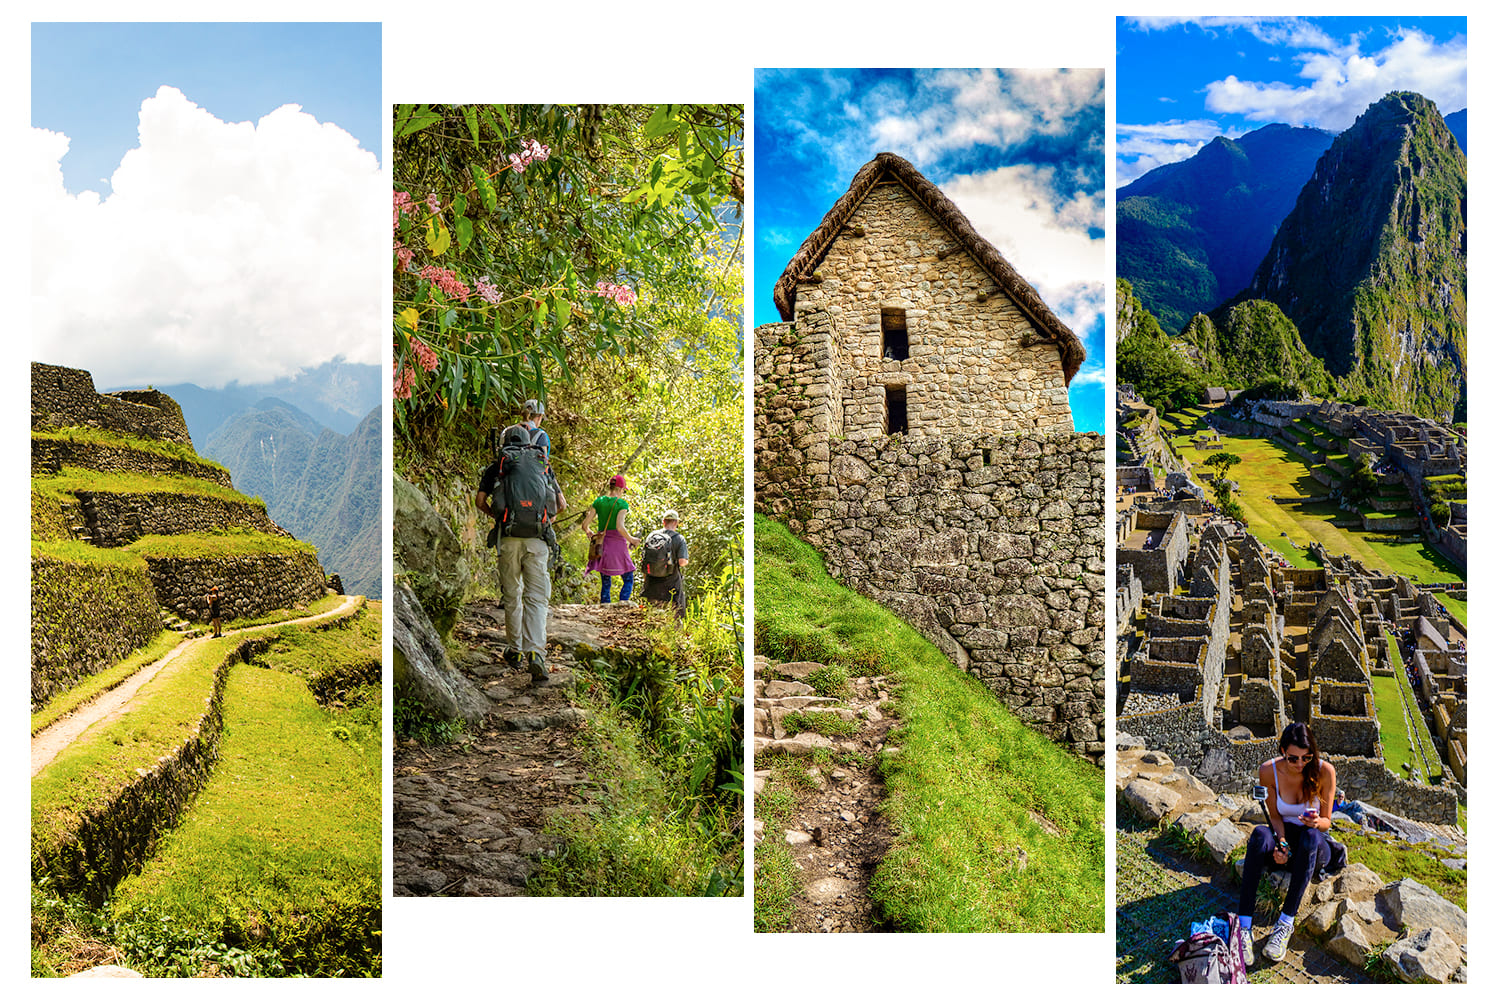 Machu Picchu, the most surprising place to see in Peru